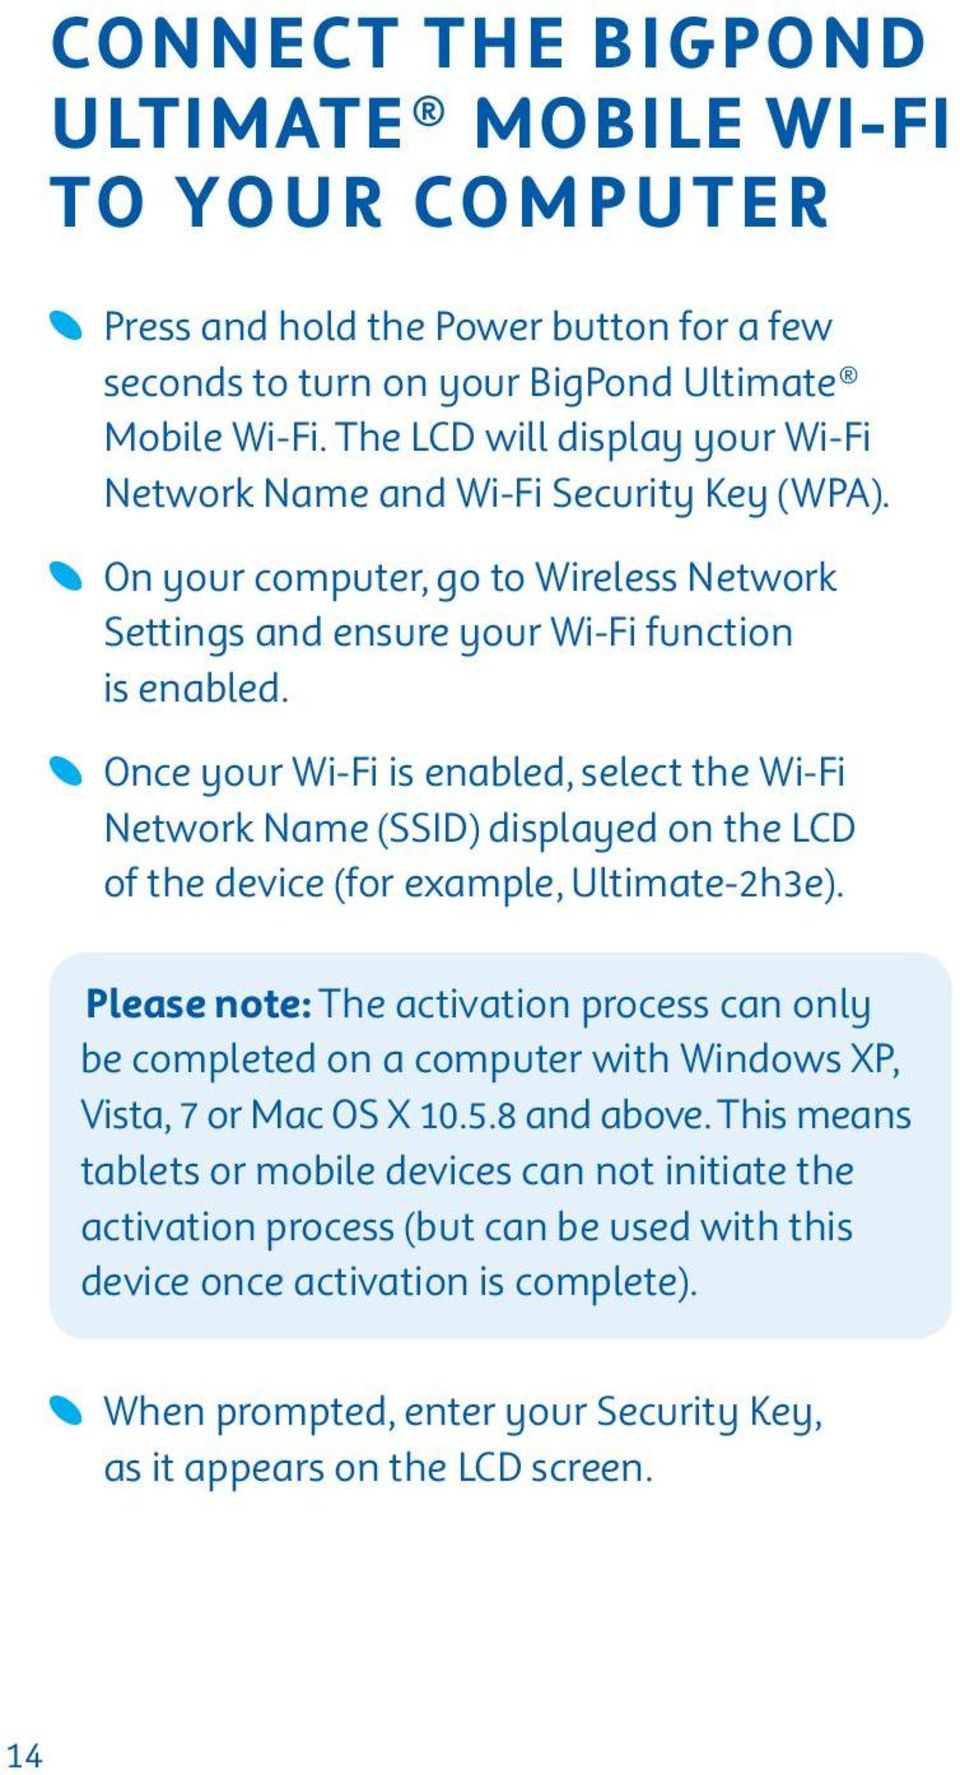 Once your Wi-Fi is enabled, select the Wi-Fi Network Name (SSID) displayed on the LCD of the device (for example, Ultimate-2h3e).